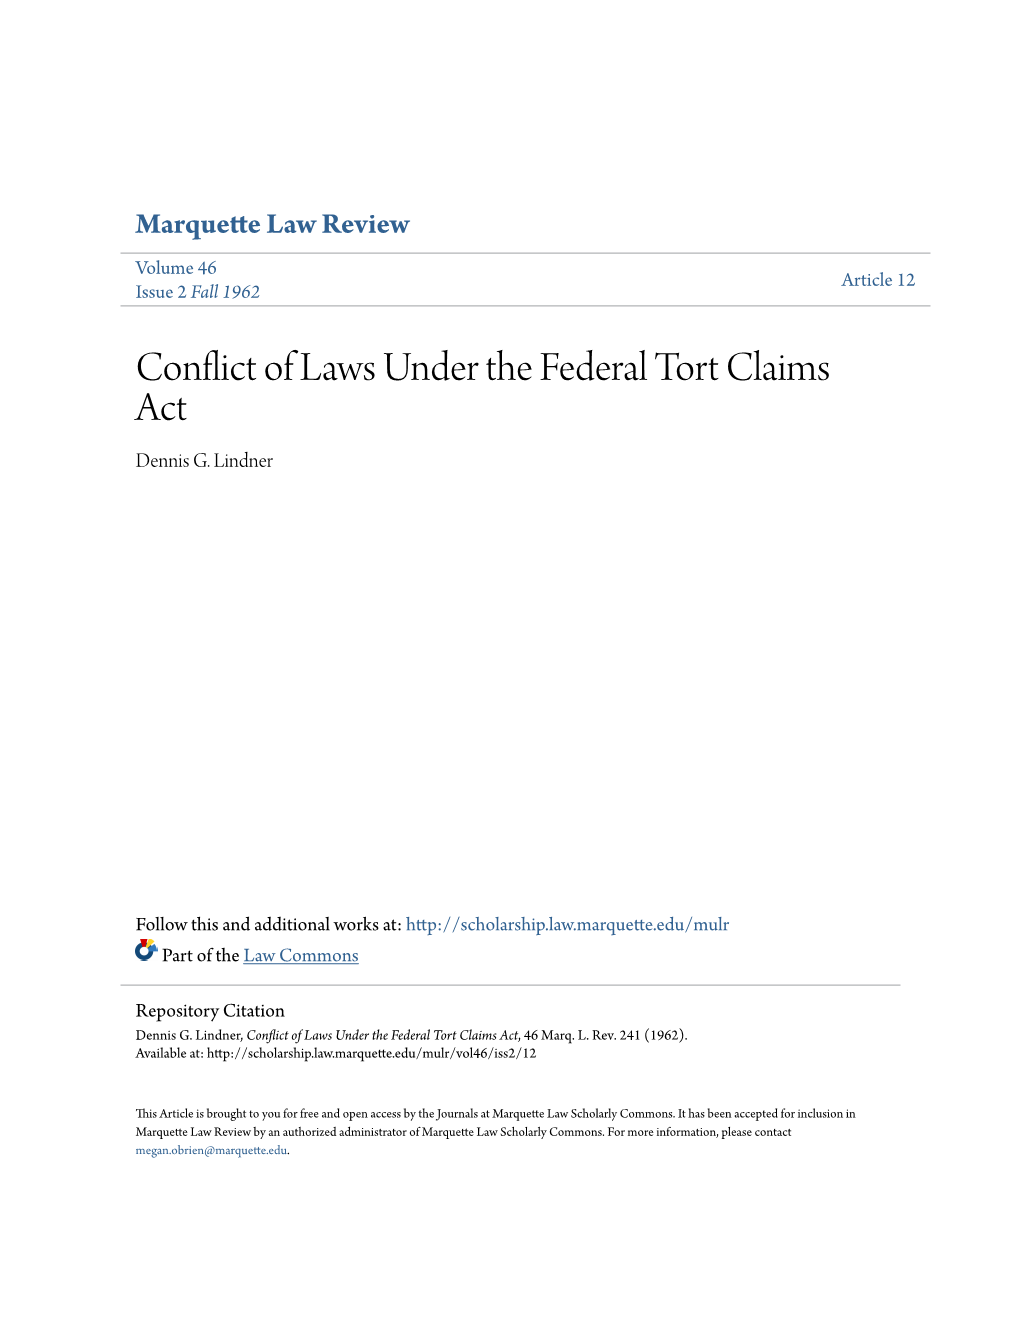 Conflict of Laws Under the Federal Tort Claims Act Dennis G